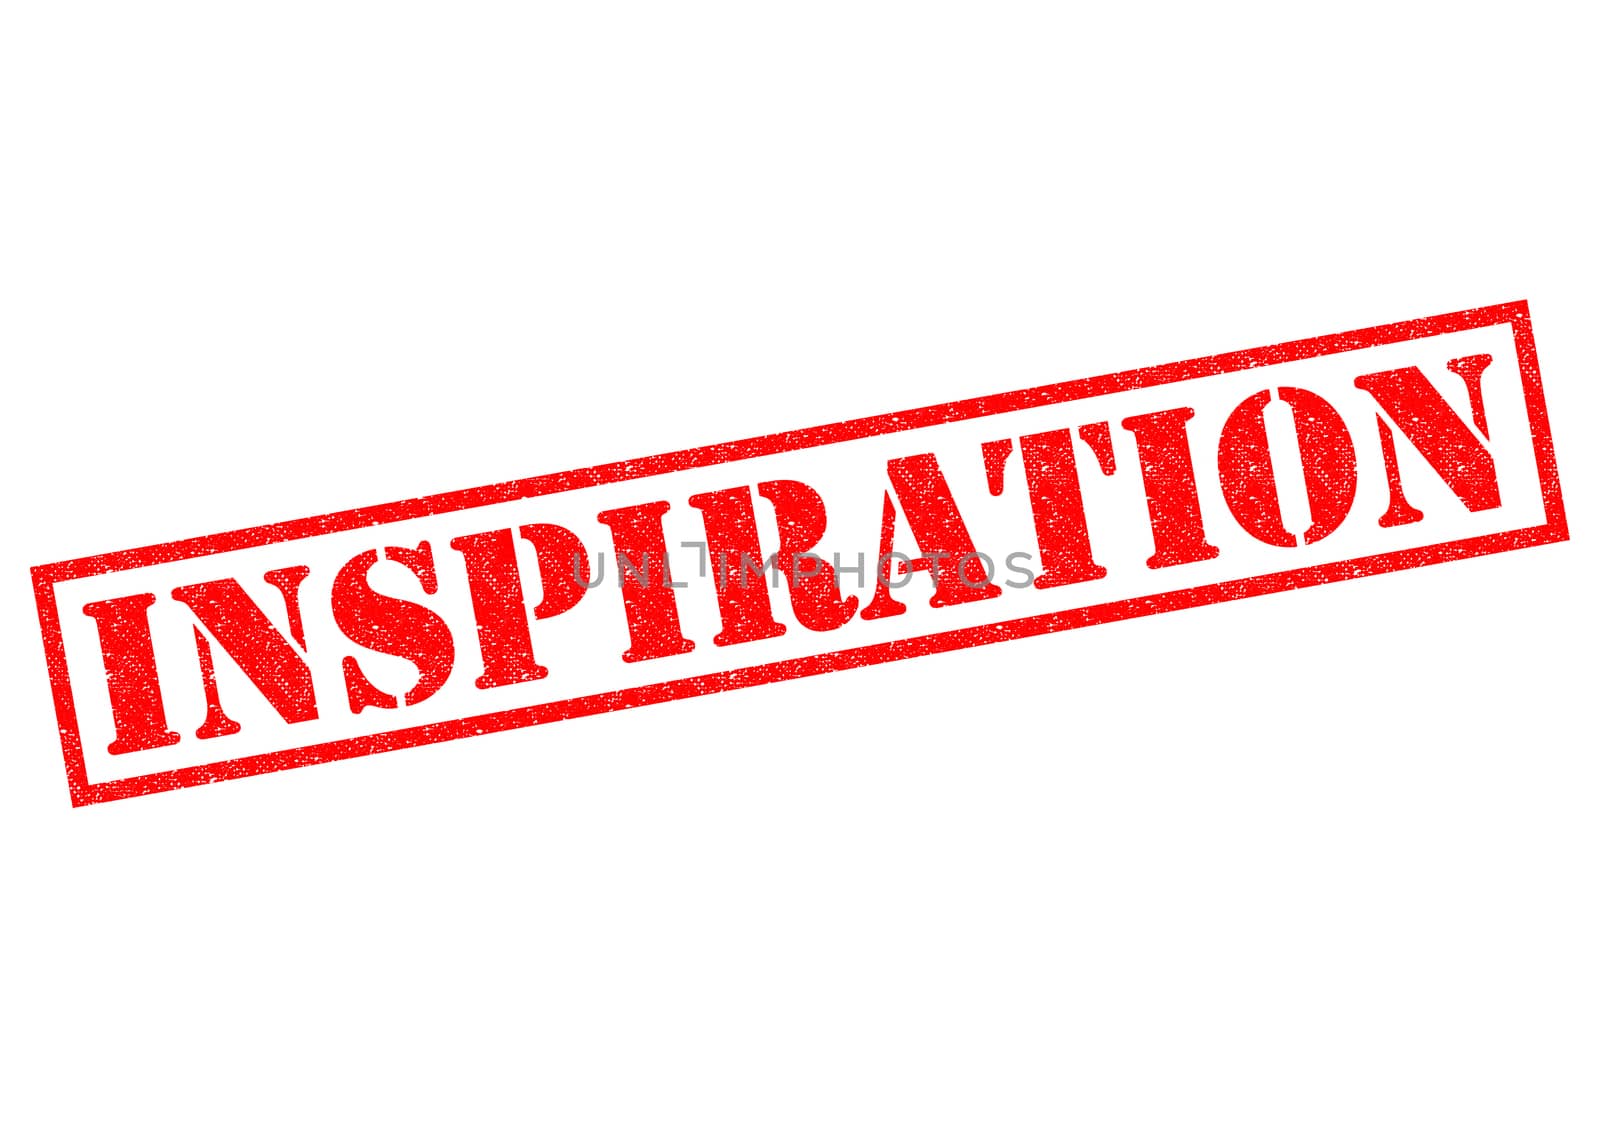 INSPIRATION red Rubber Stamp over a white background.